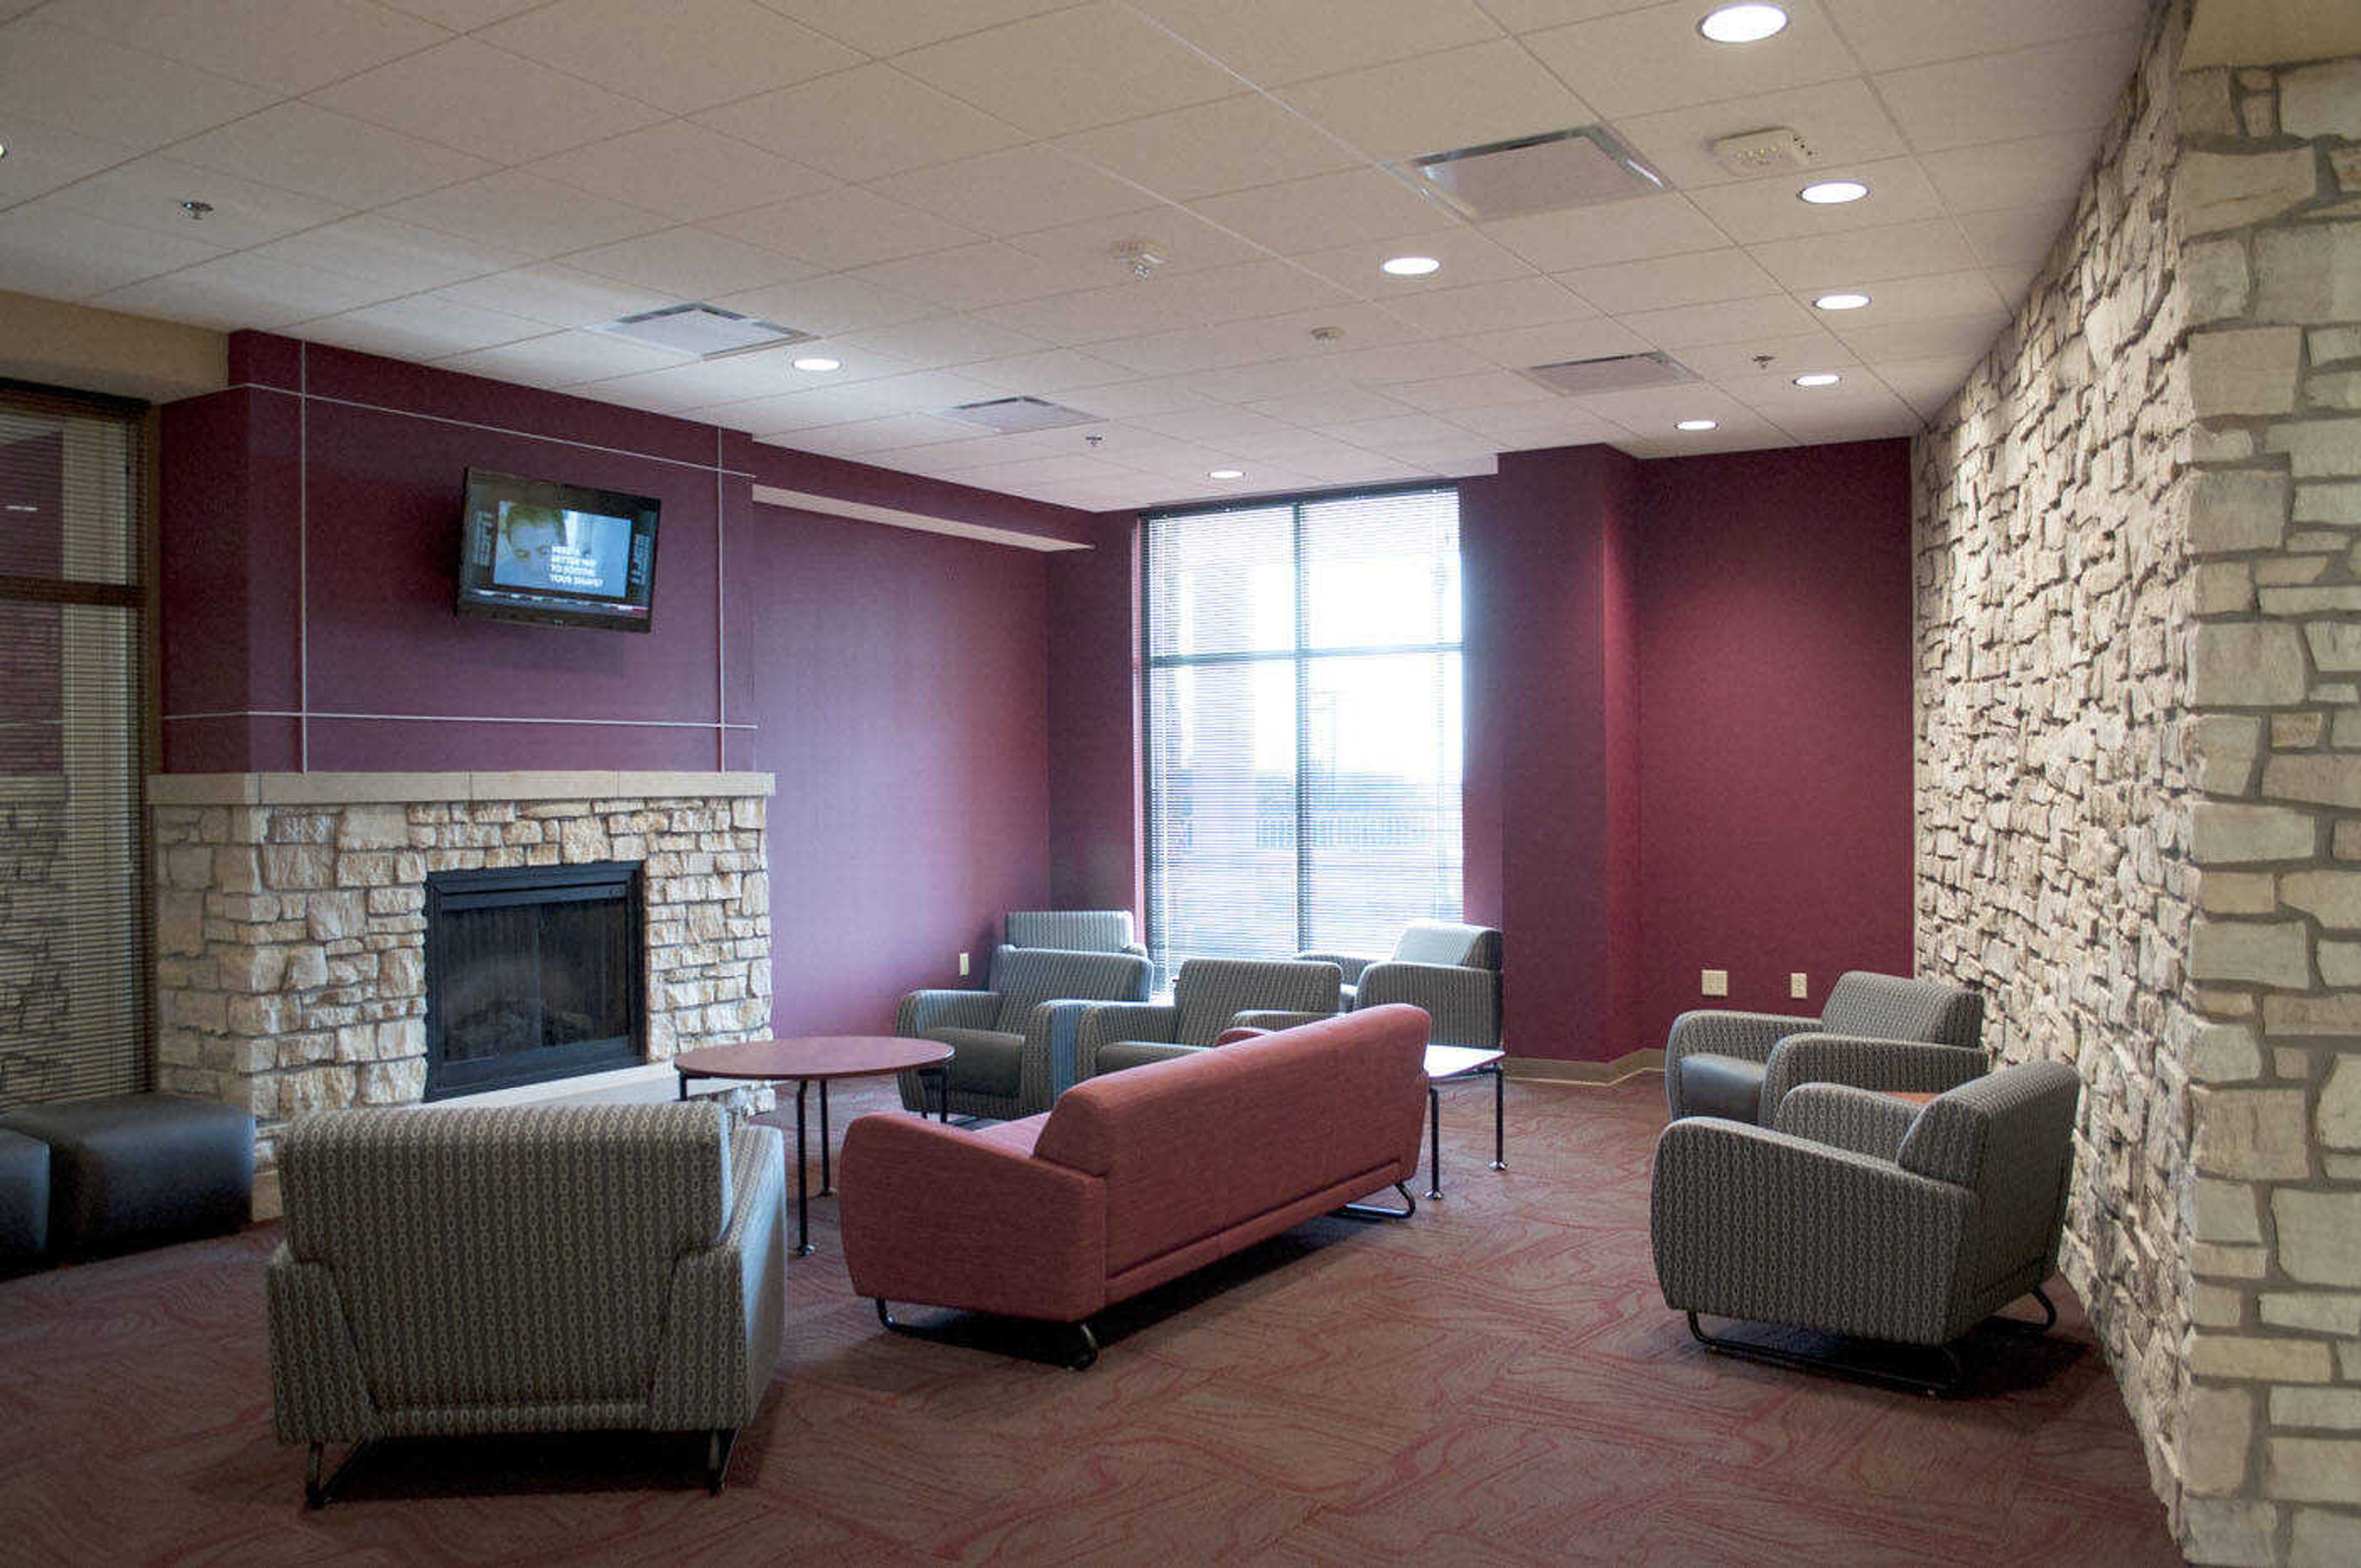 New residence hall offers learning communities for Southeast students